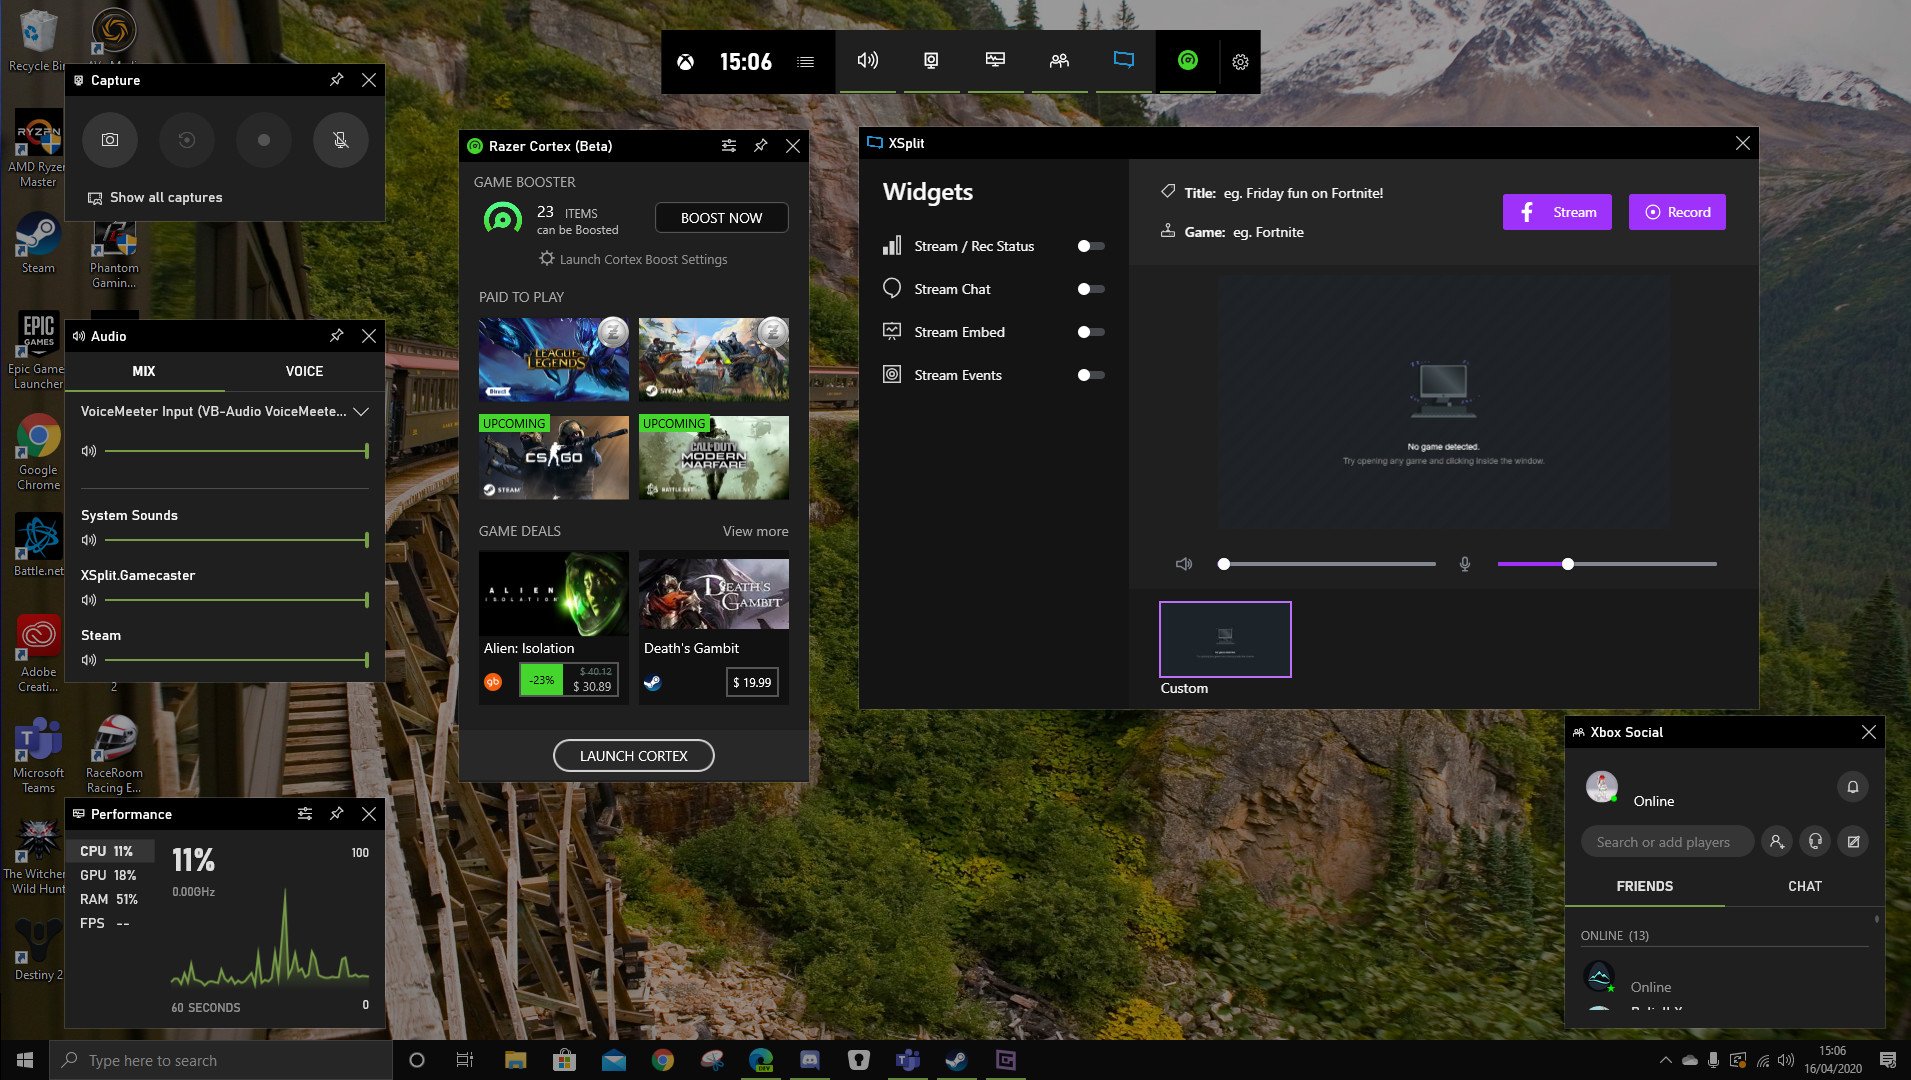 Xbox Game Bar Update: Introducing the Resources Widget - Xbox Wire